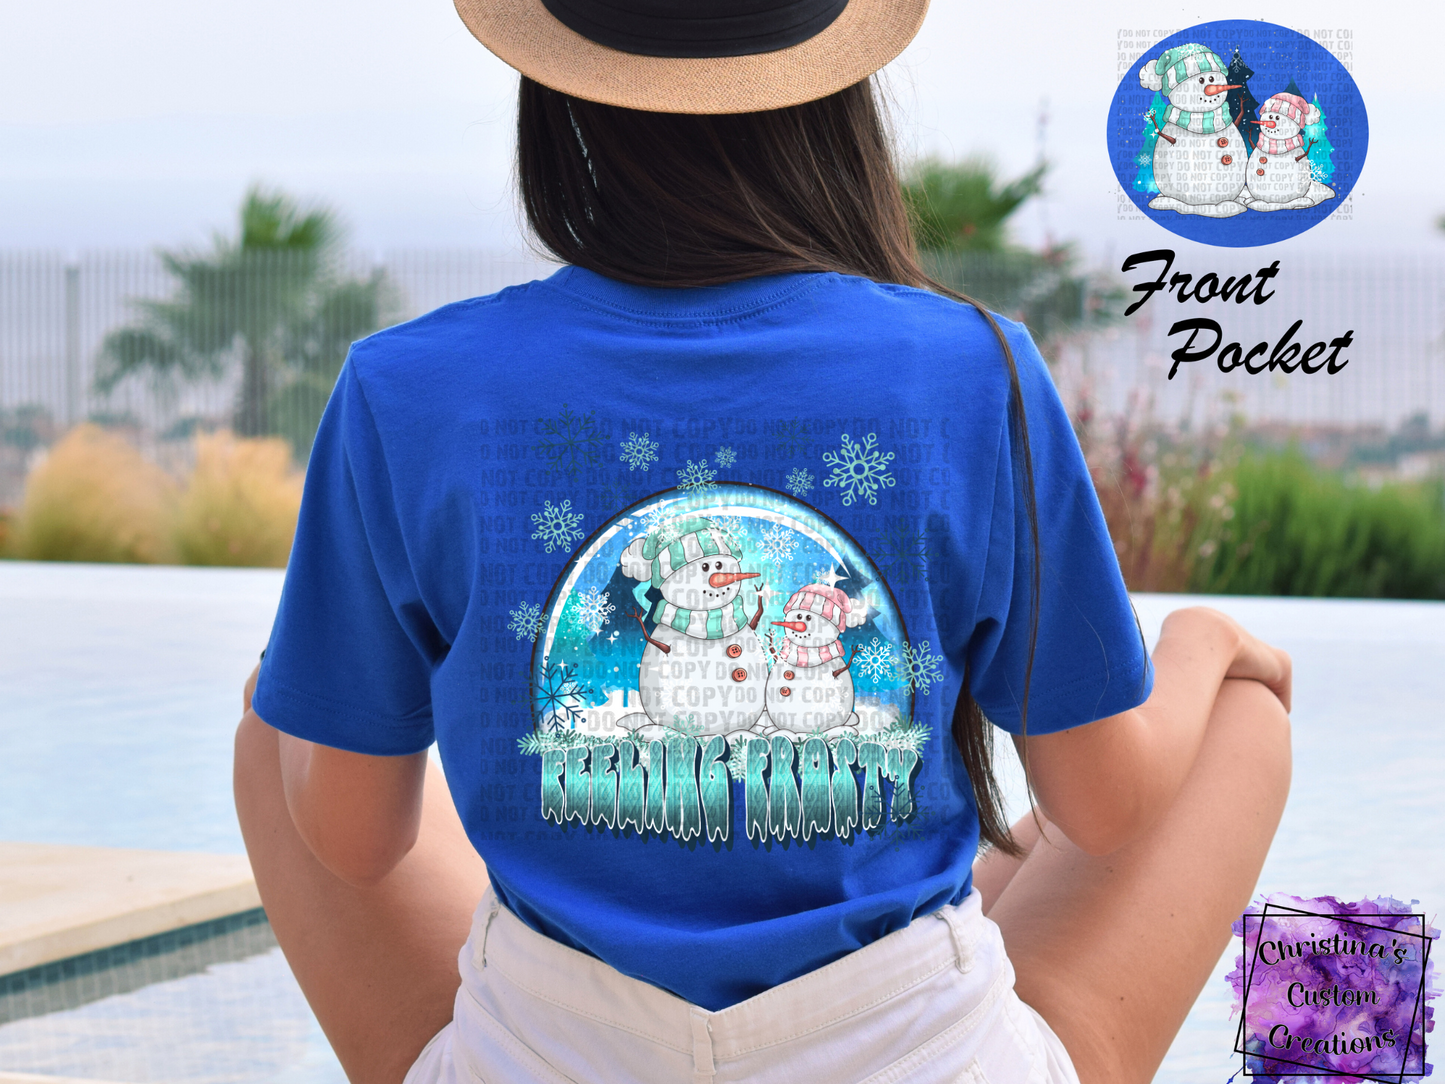 Feeling Frosty T-Shirt | Cute Christmas Shirt | Front and Back Shirt | Fast Shipping | Super Soft Shirts for Women/Kid's